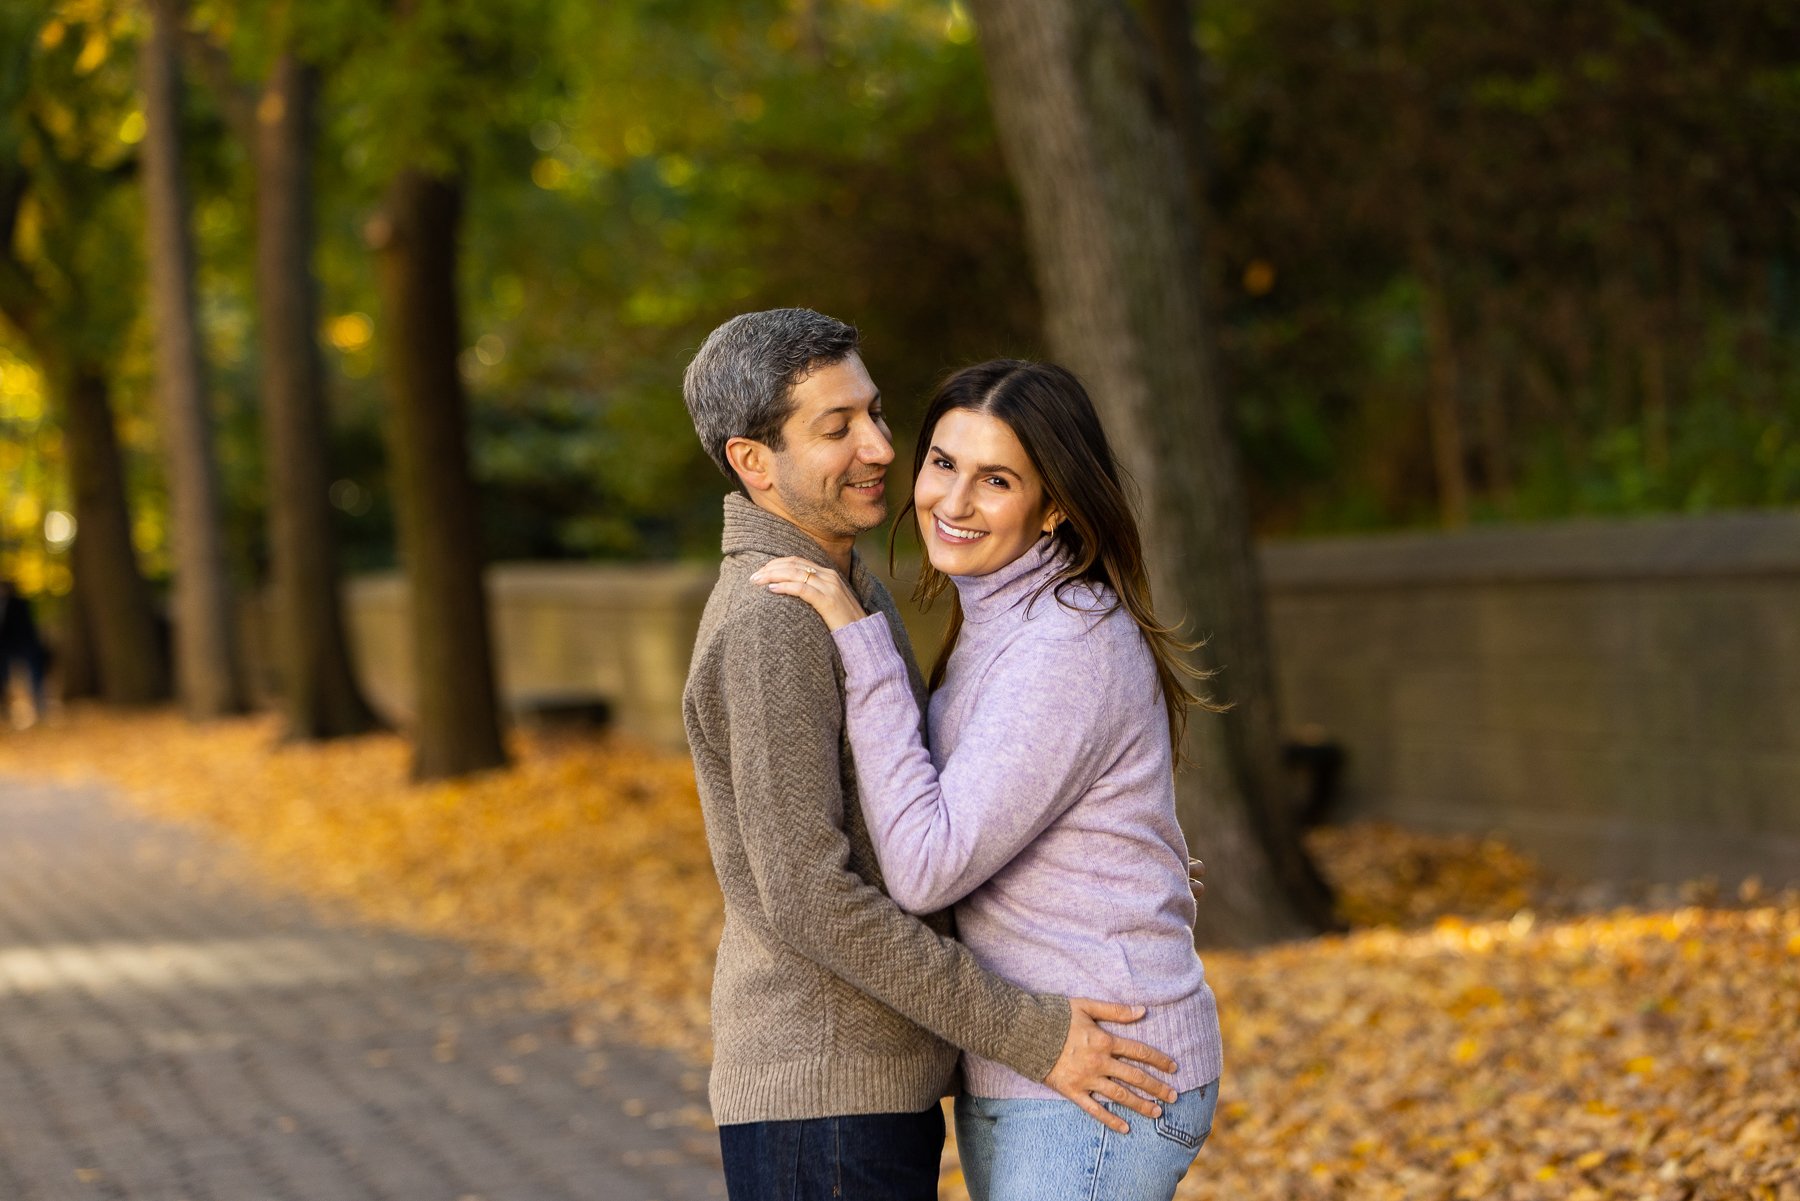 Central Park NYC Fall Foliage Engagement Session_1191.jpg